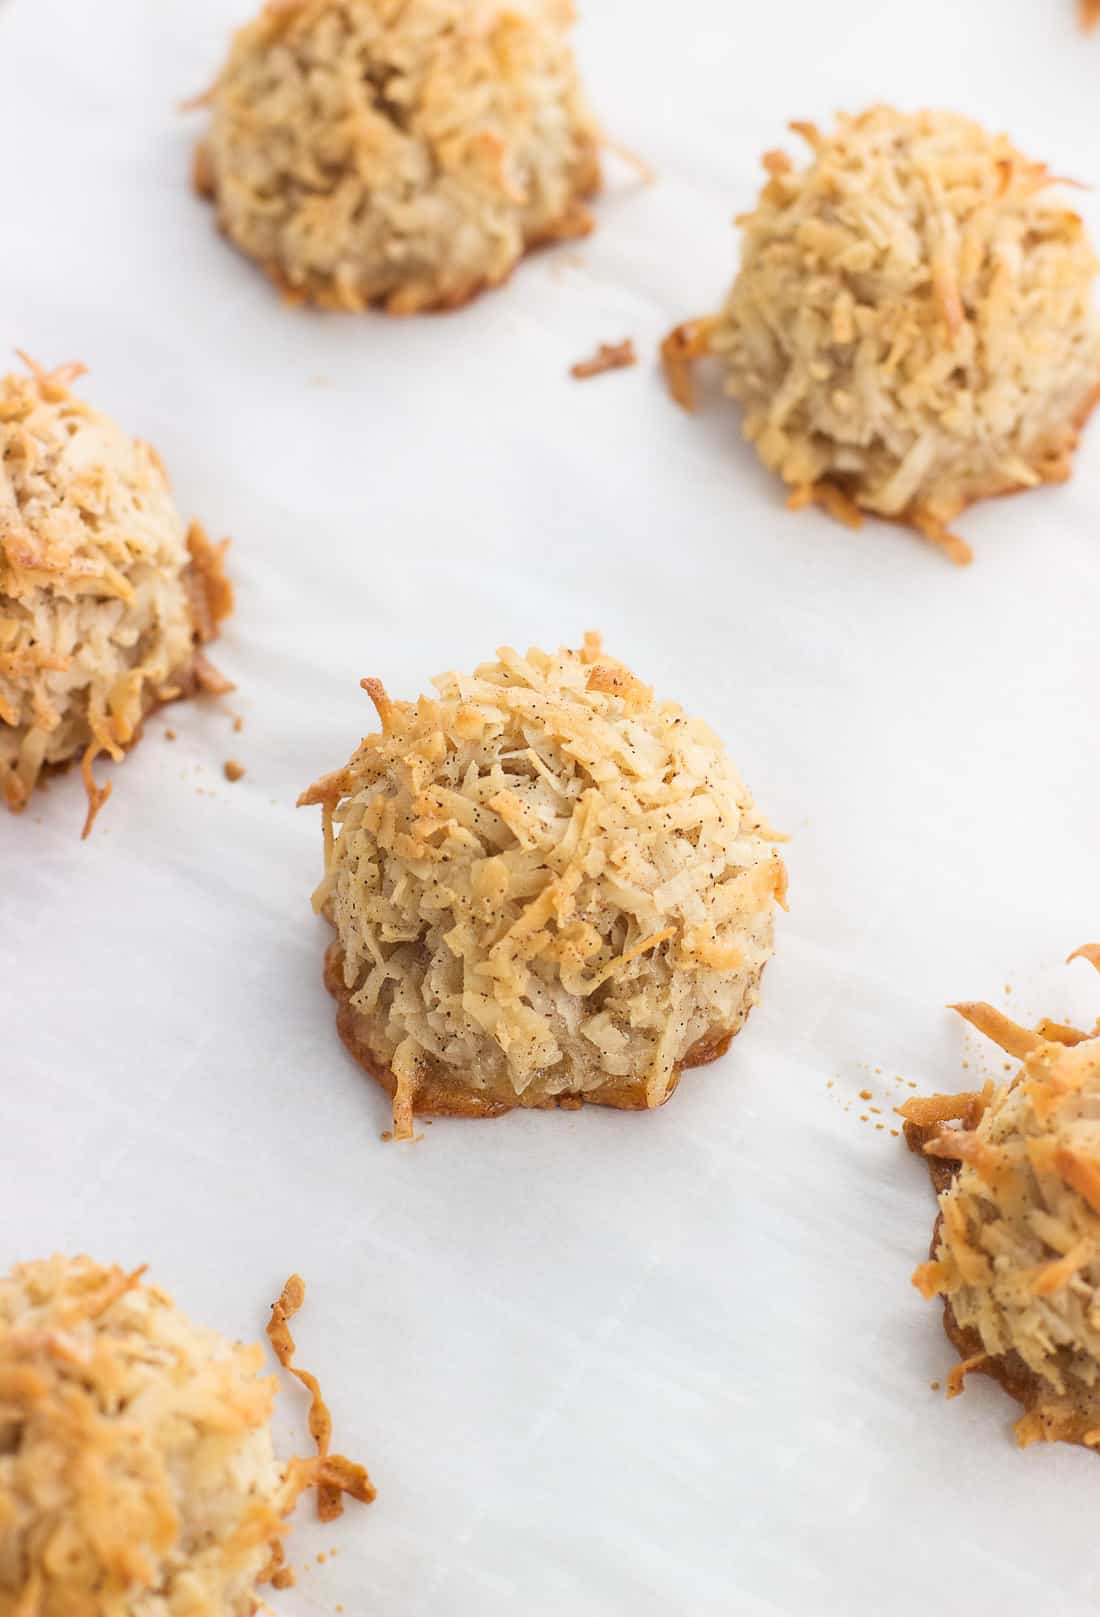 Baked macaroons on a parchment-lined baking sheet